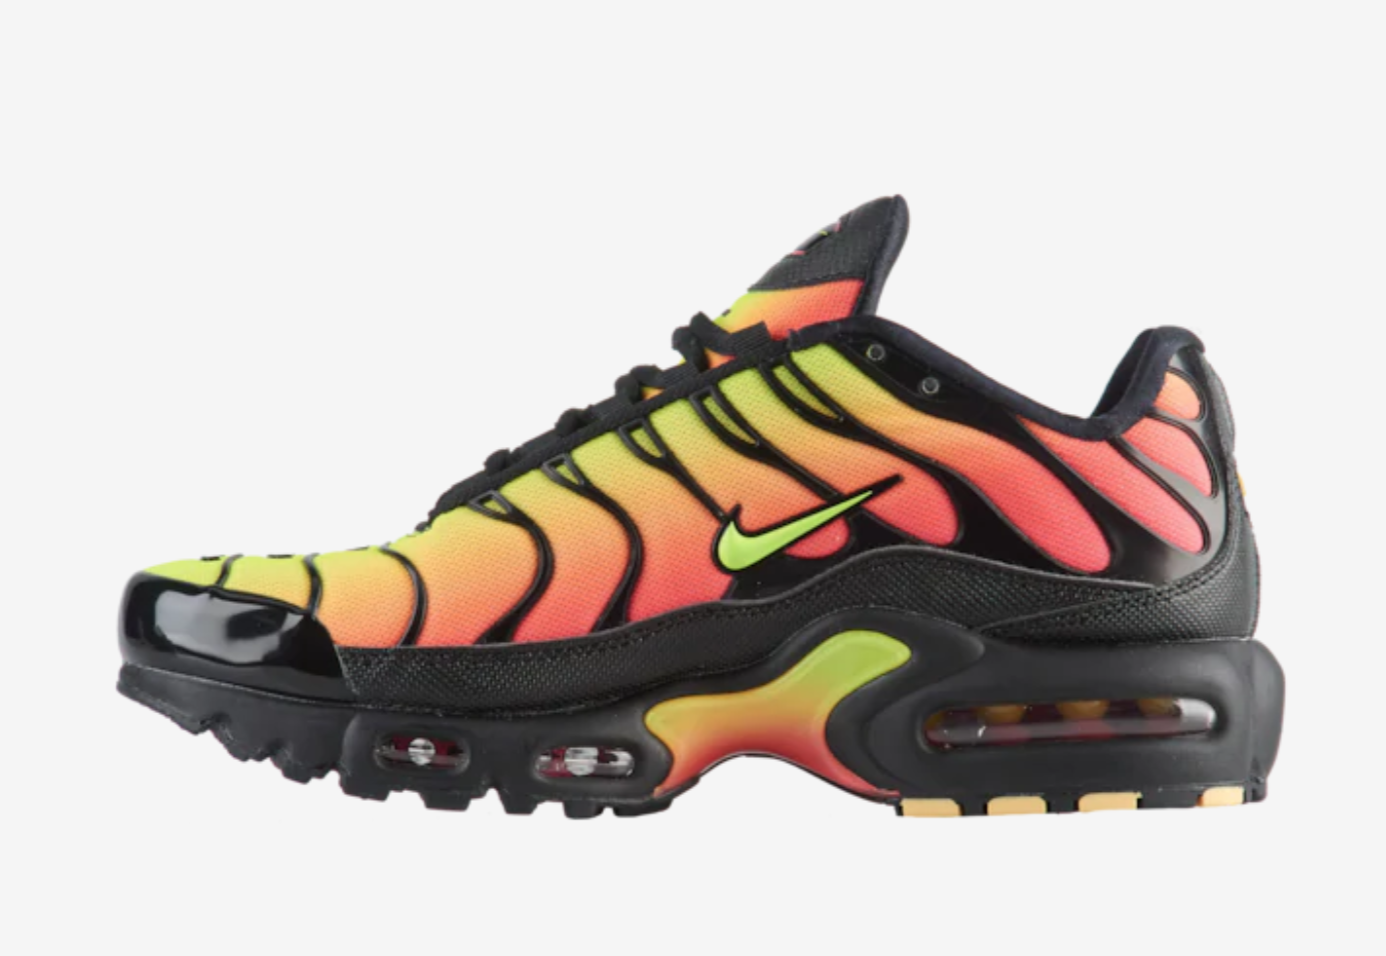 Best Nike Air Max Shoes 2019 | Air Max Releases and Deals